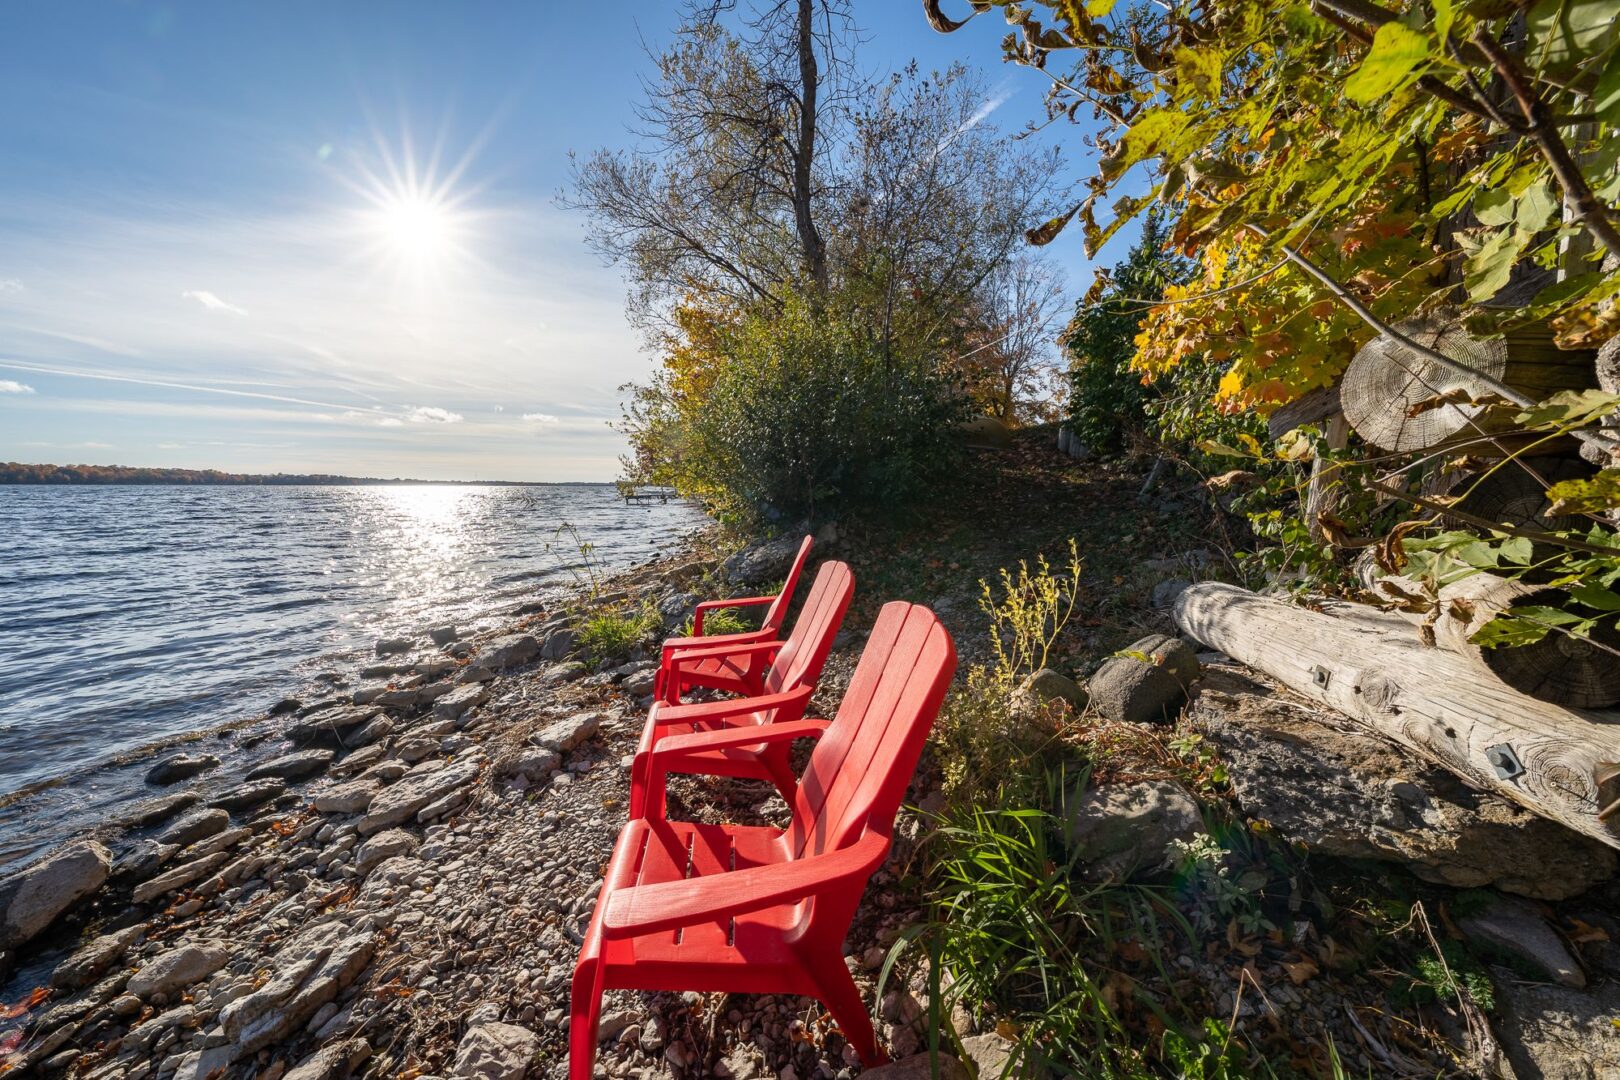 Two red Muskoka chairs sit on the rocky shoreline of a sunny stretch of lake.